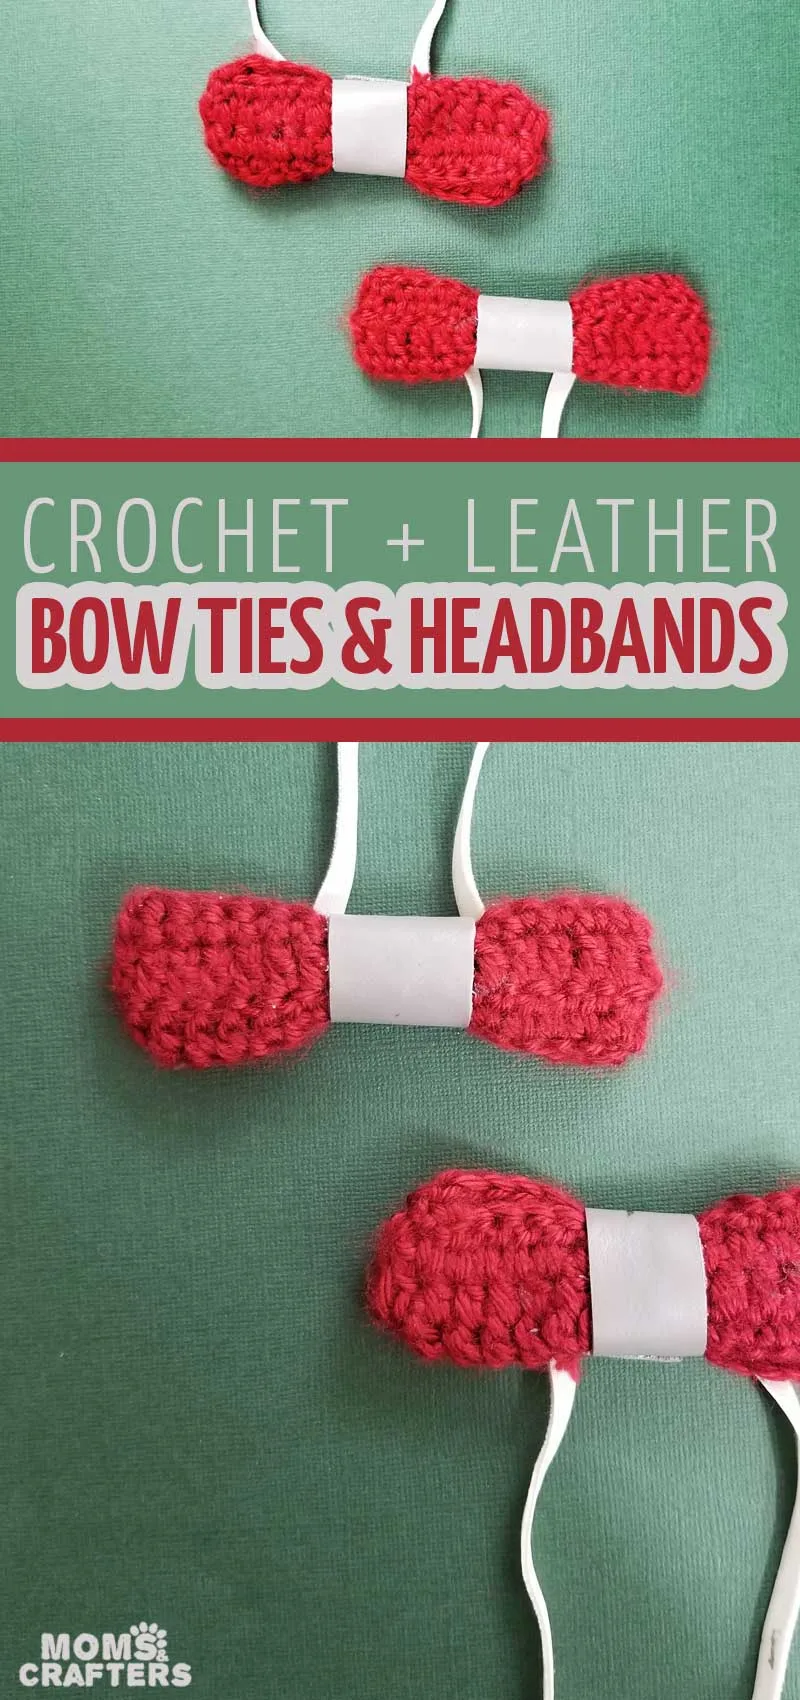 Click to learn how to crochet a bow and make your own DIY no sew bow ties and headbands! This super easy crochet project is perfect for beginners and doesn't even require a pattern to make it!